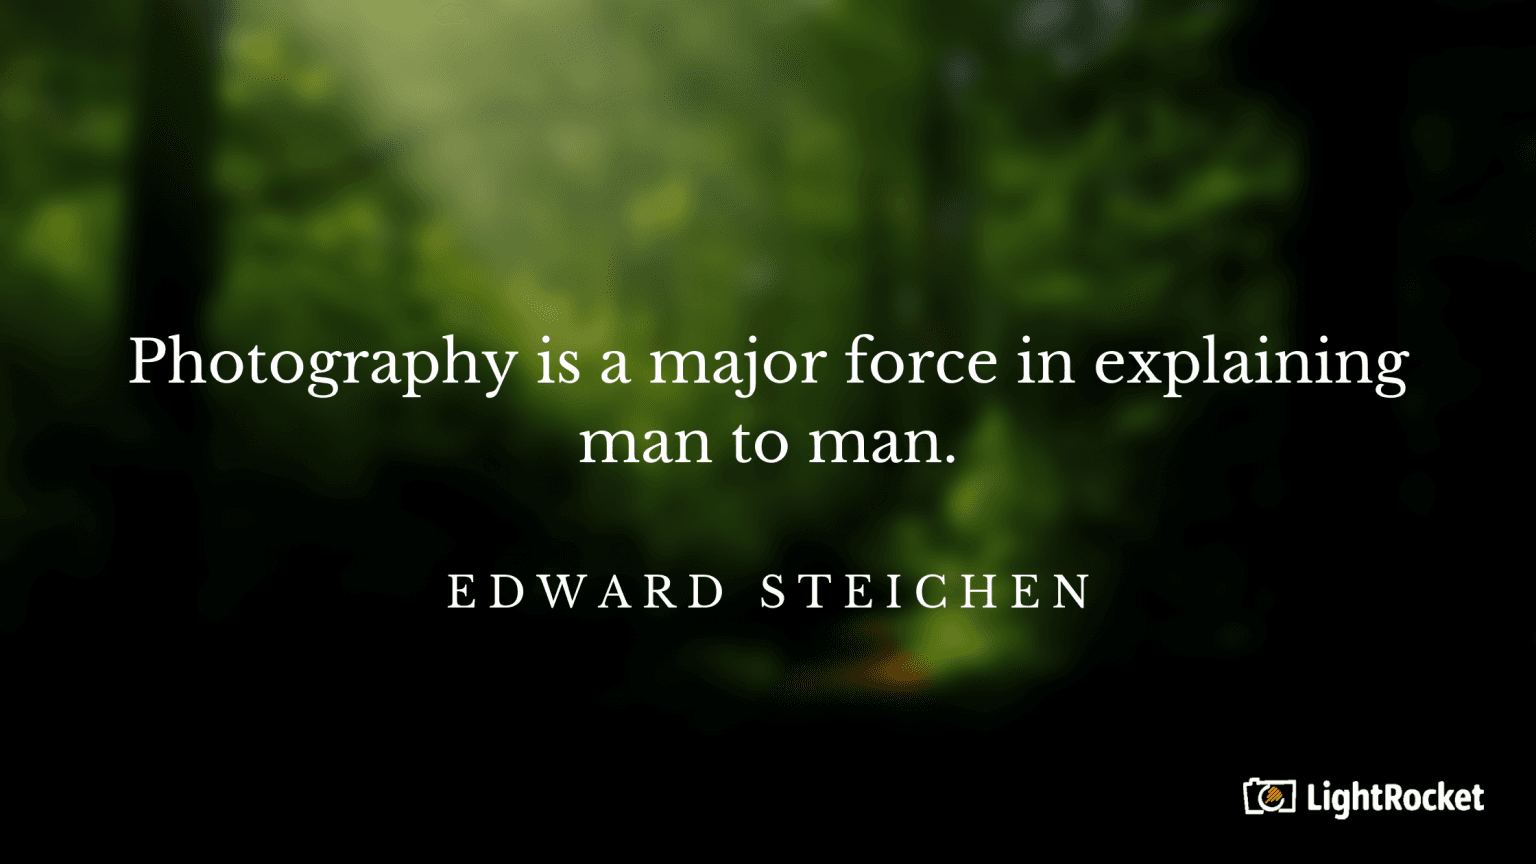 “Photography is a major force in explaining man to man.” – Edward Steichen